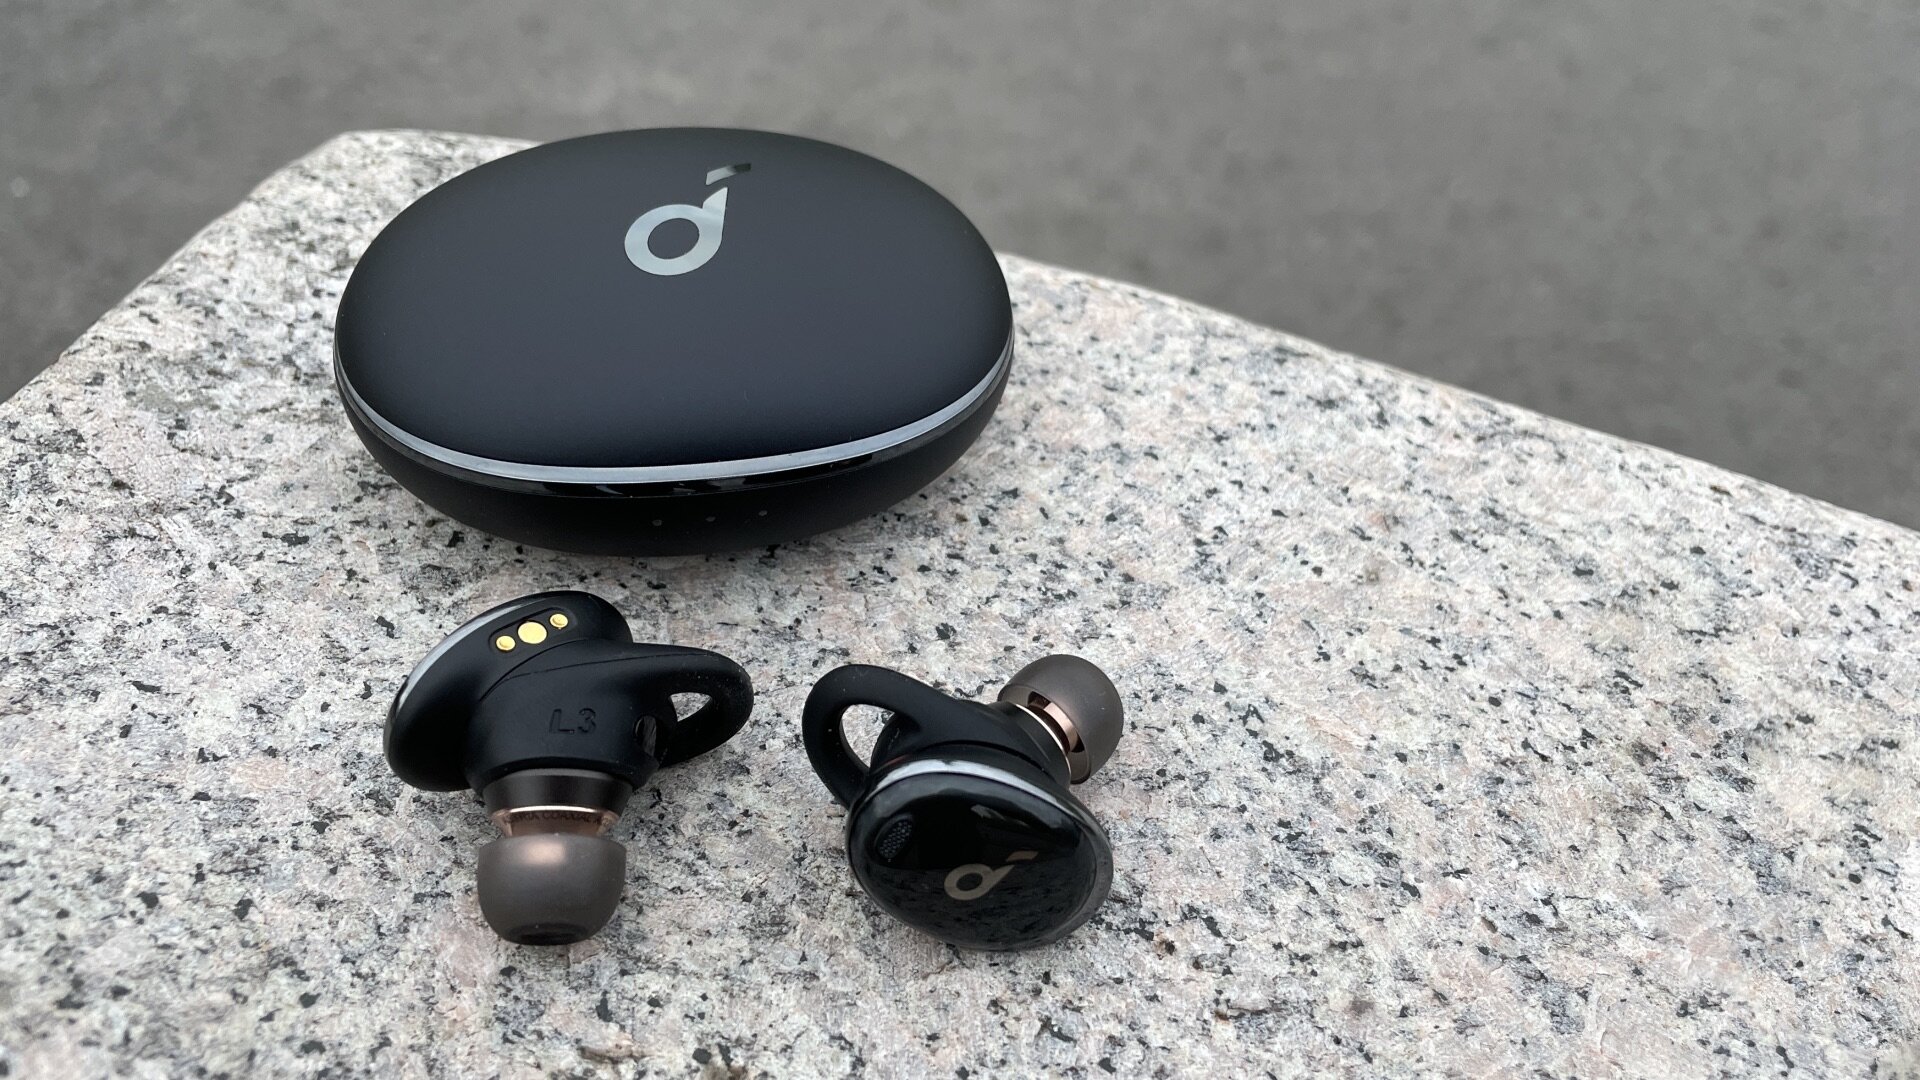 Review: Soundcore Liberty 3 Pro true wireless earbuds are next level